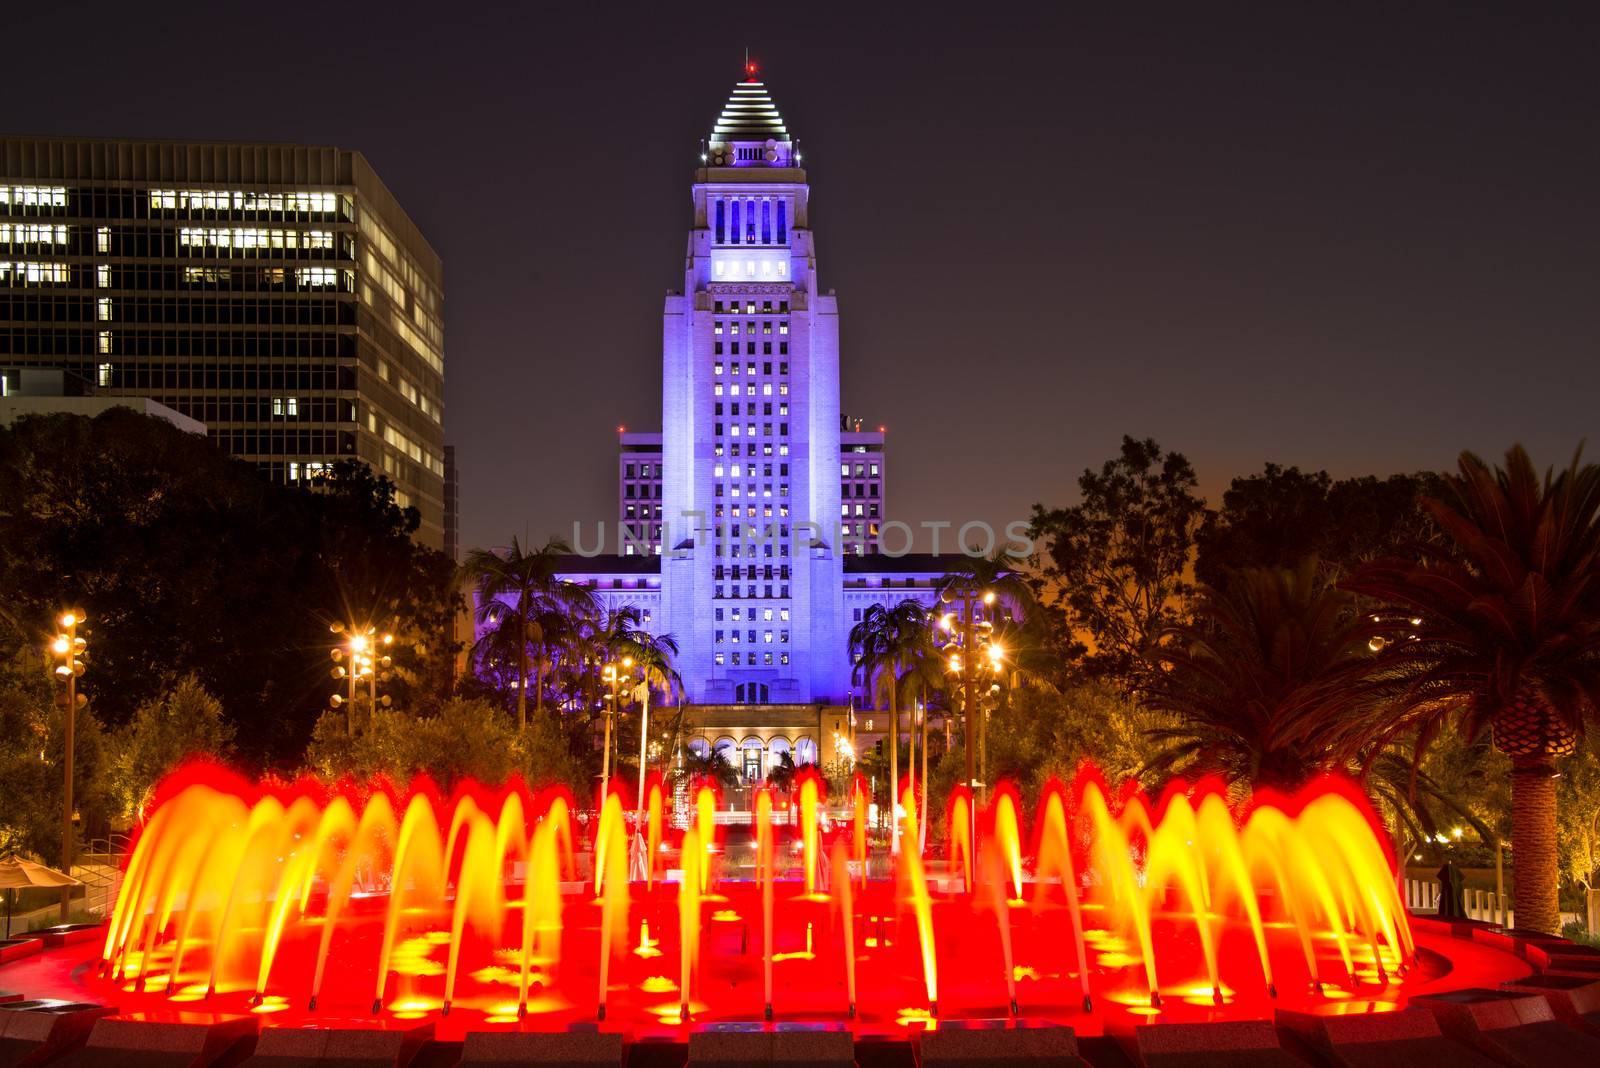 Los Angeles City Hall as seen from the Grand Park at night, Los Angeles, California, USA